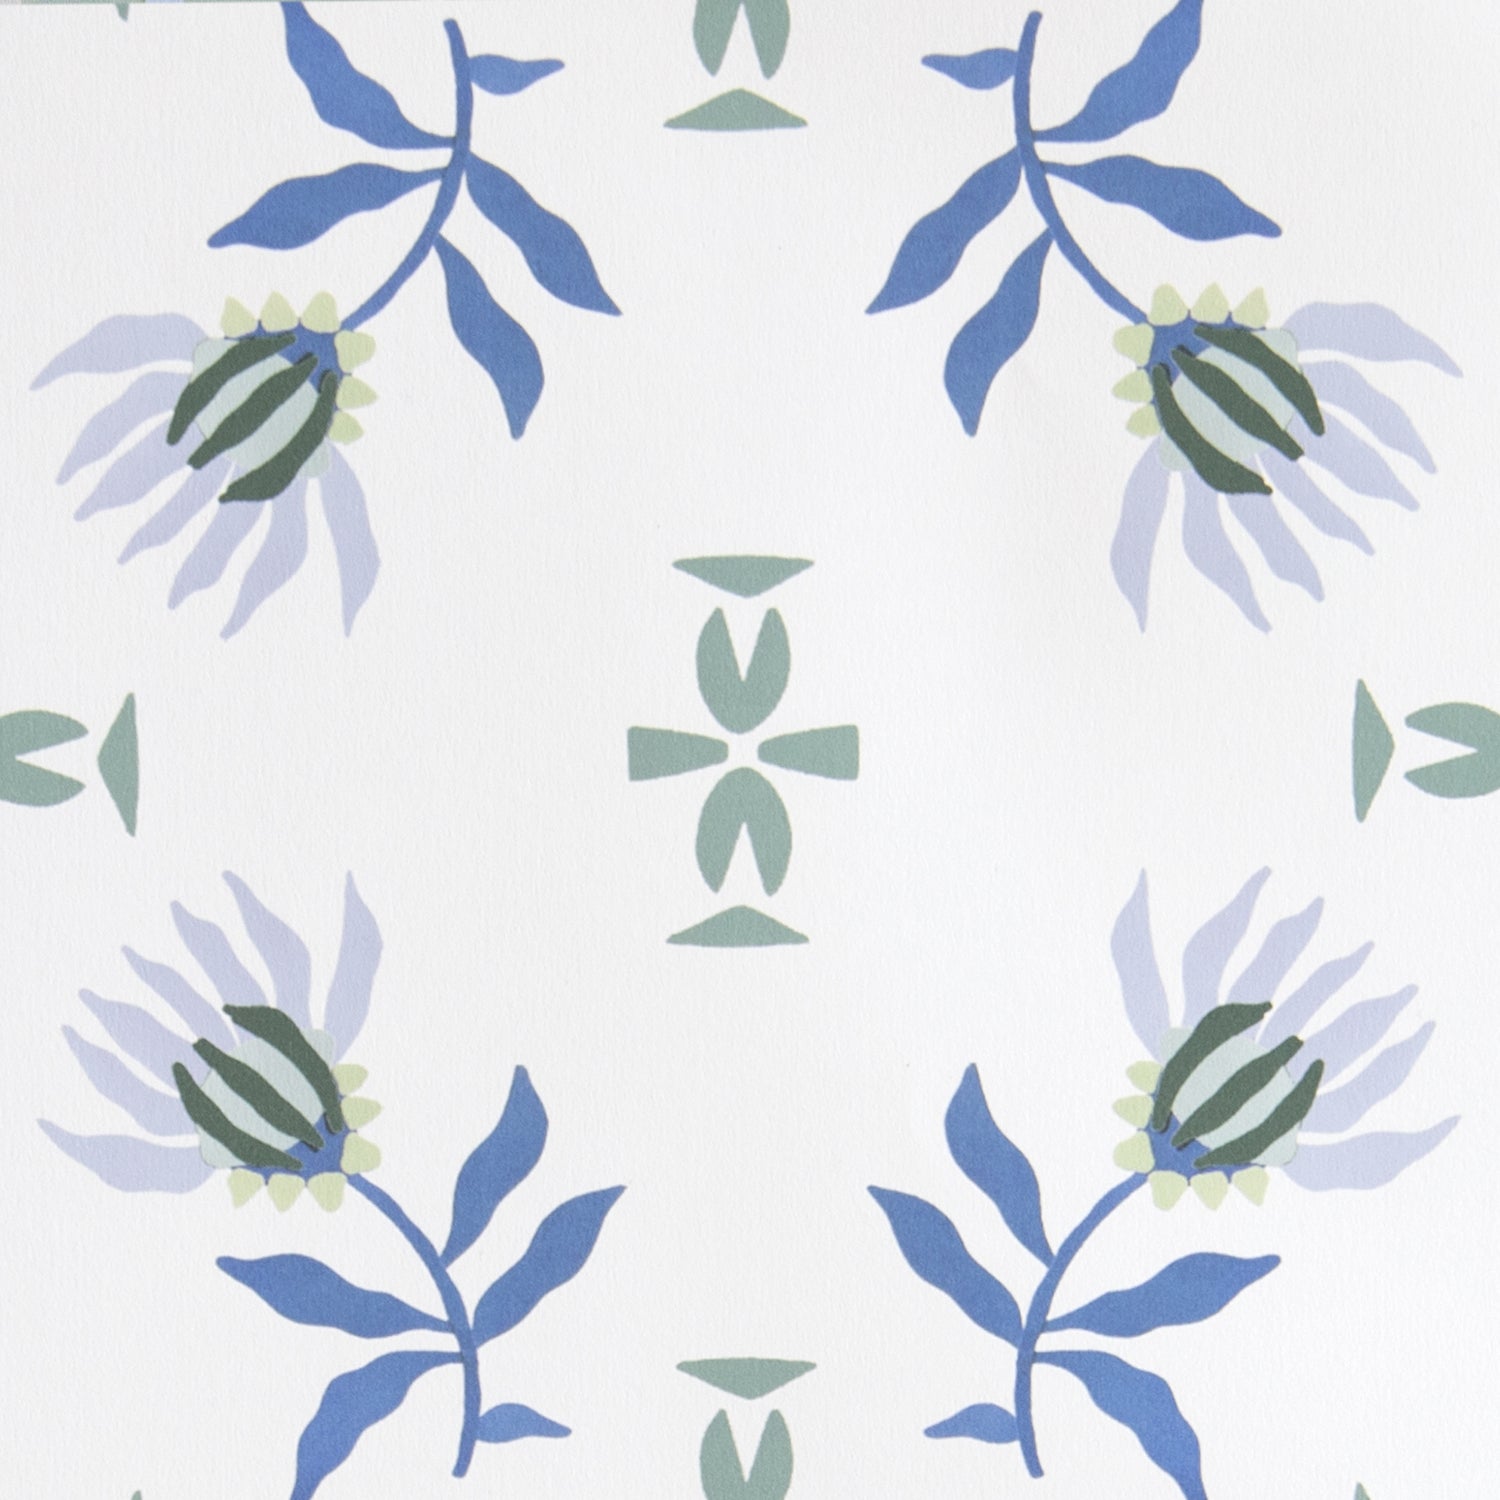 Blue & Green Floral Printed Wallpaper Swatch